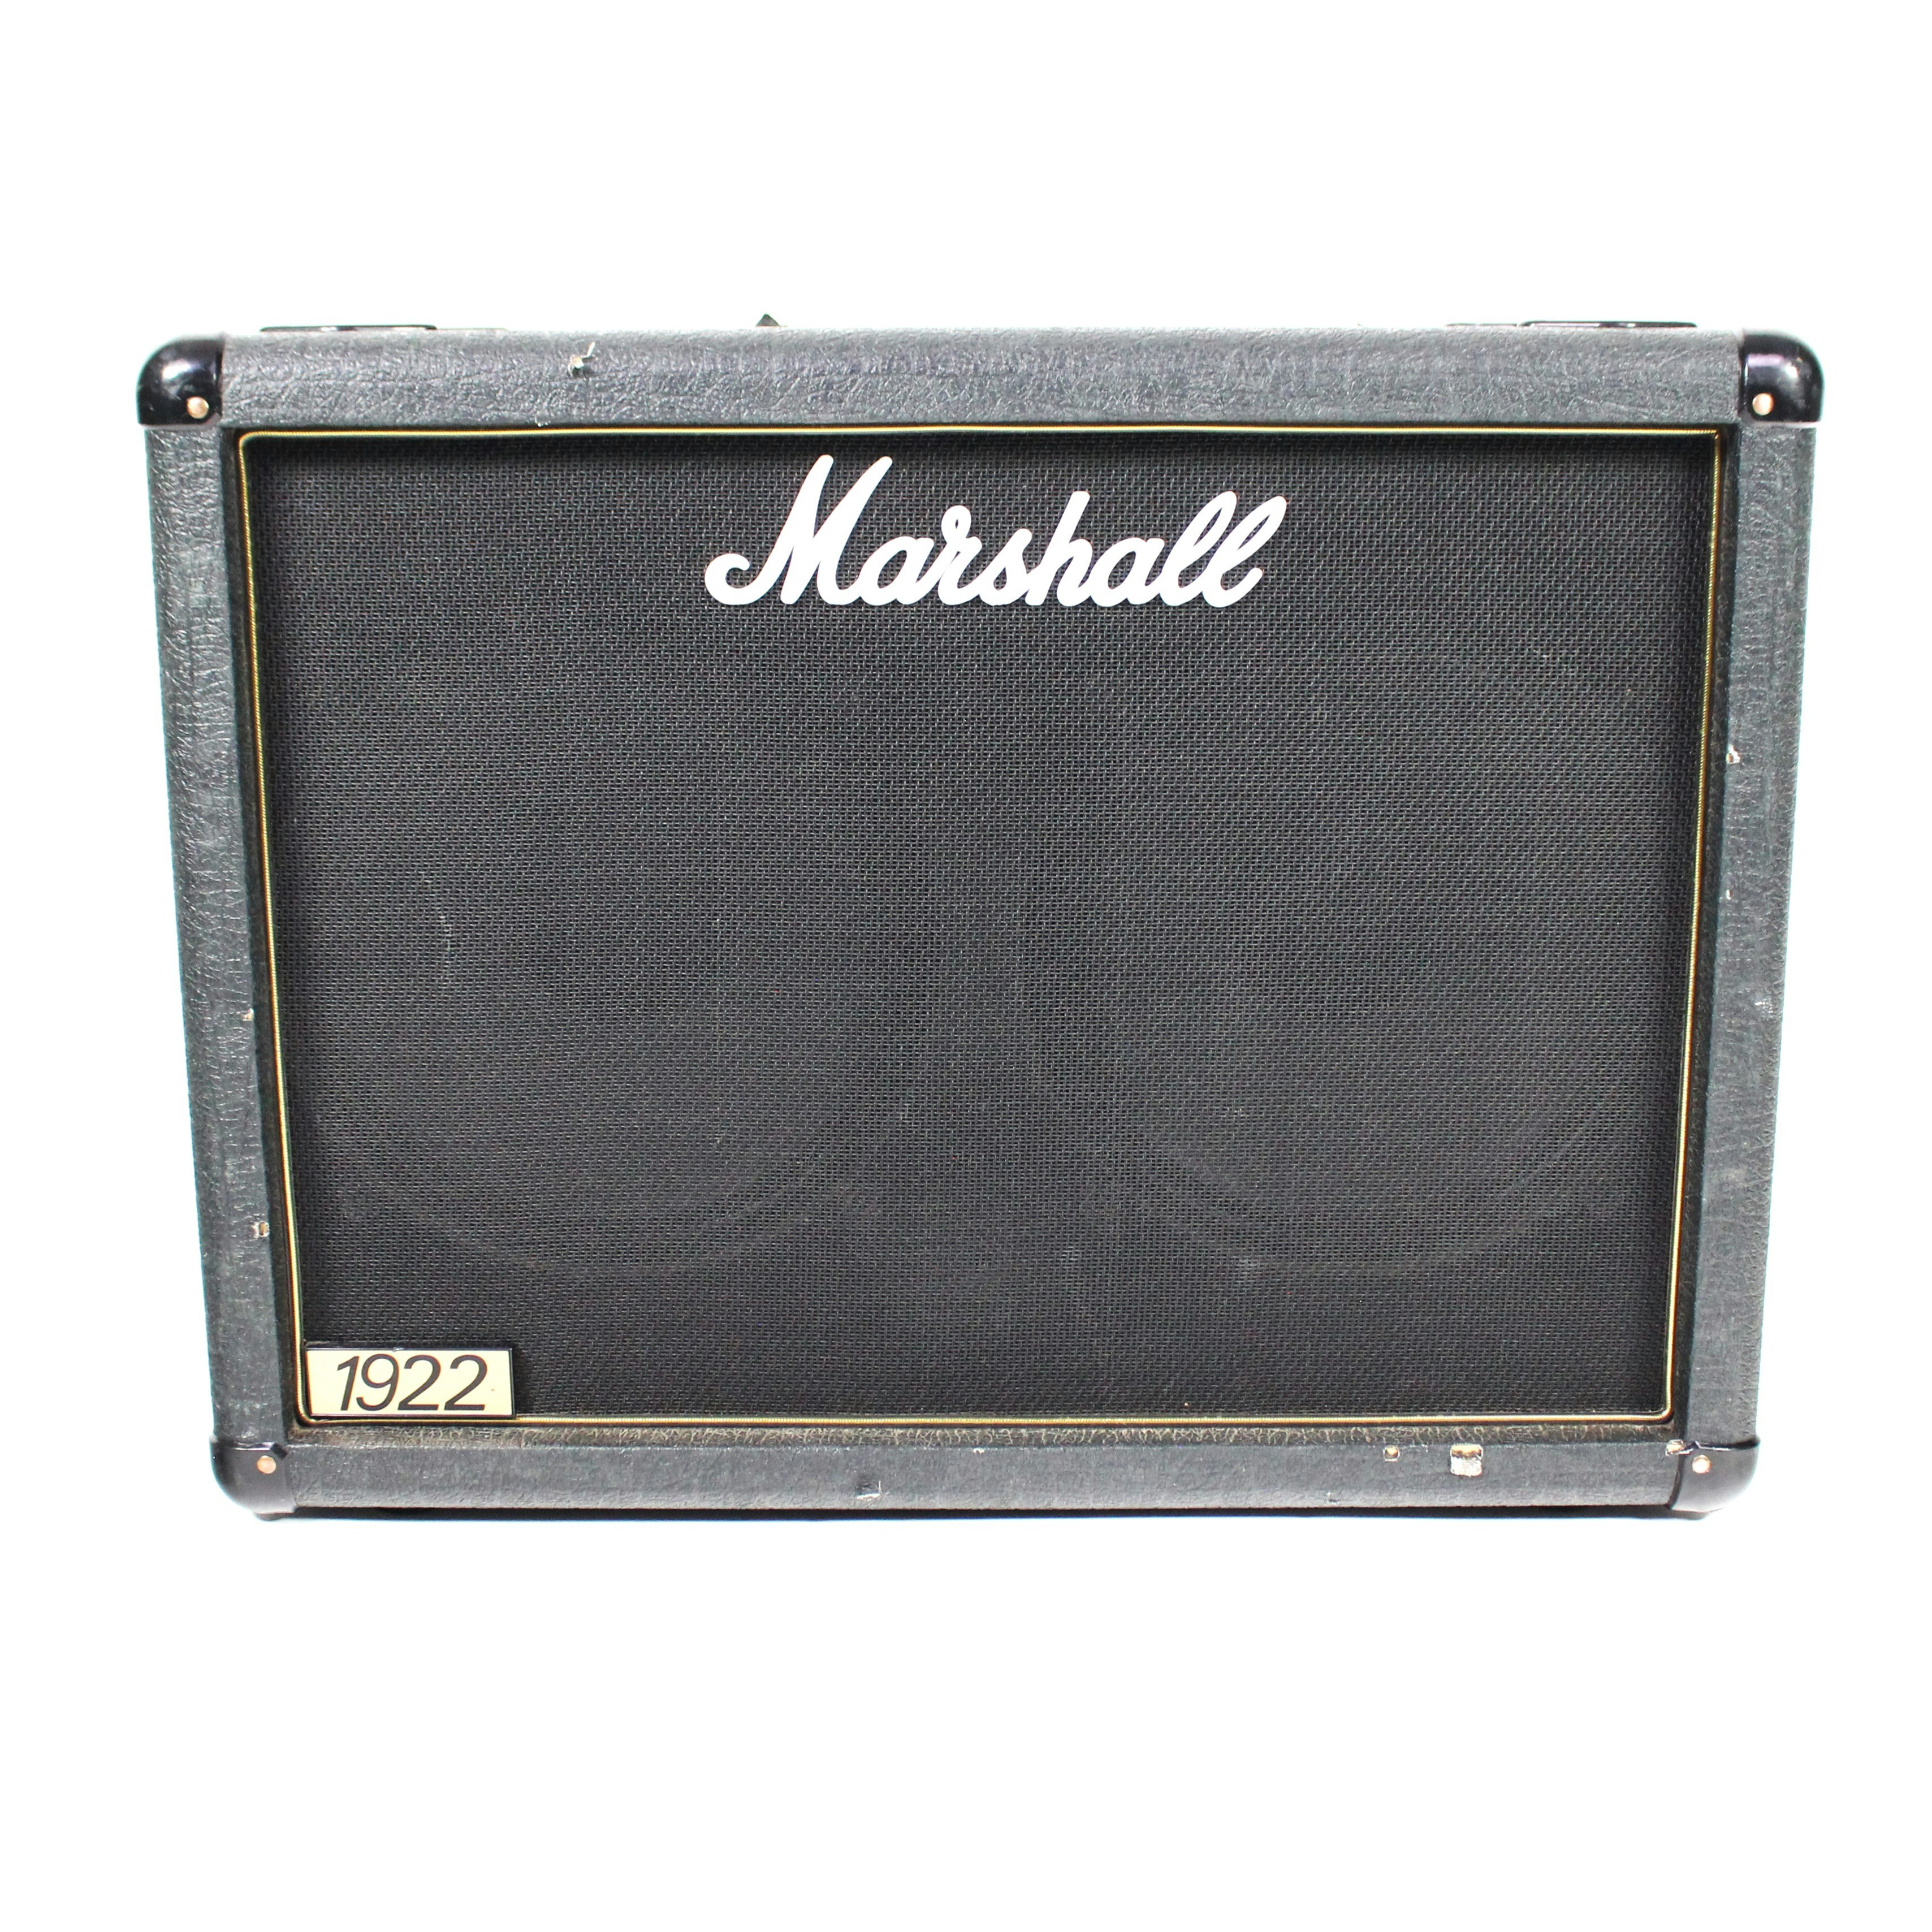 Used Marshall 1922 2X12 CABINET Guitar Speaker Cabinets 2 x 12